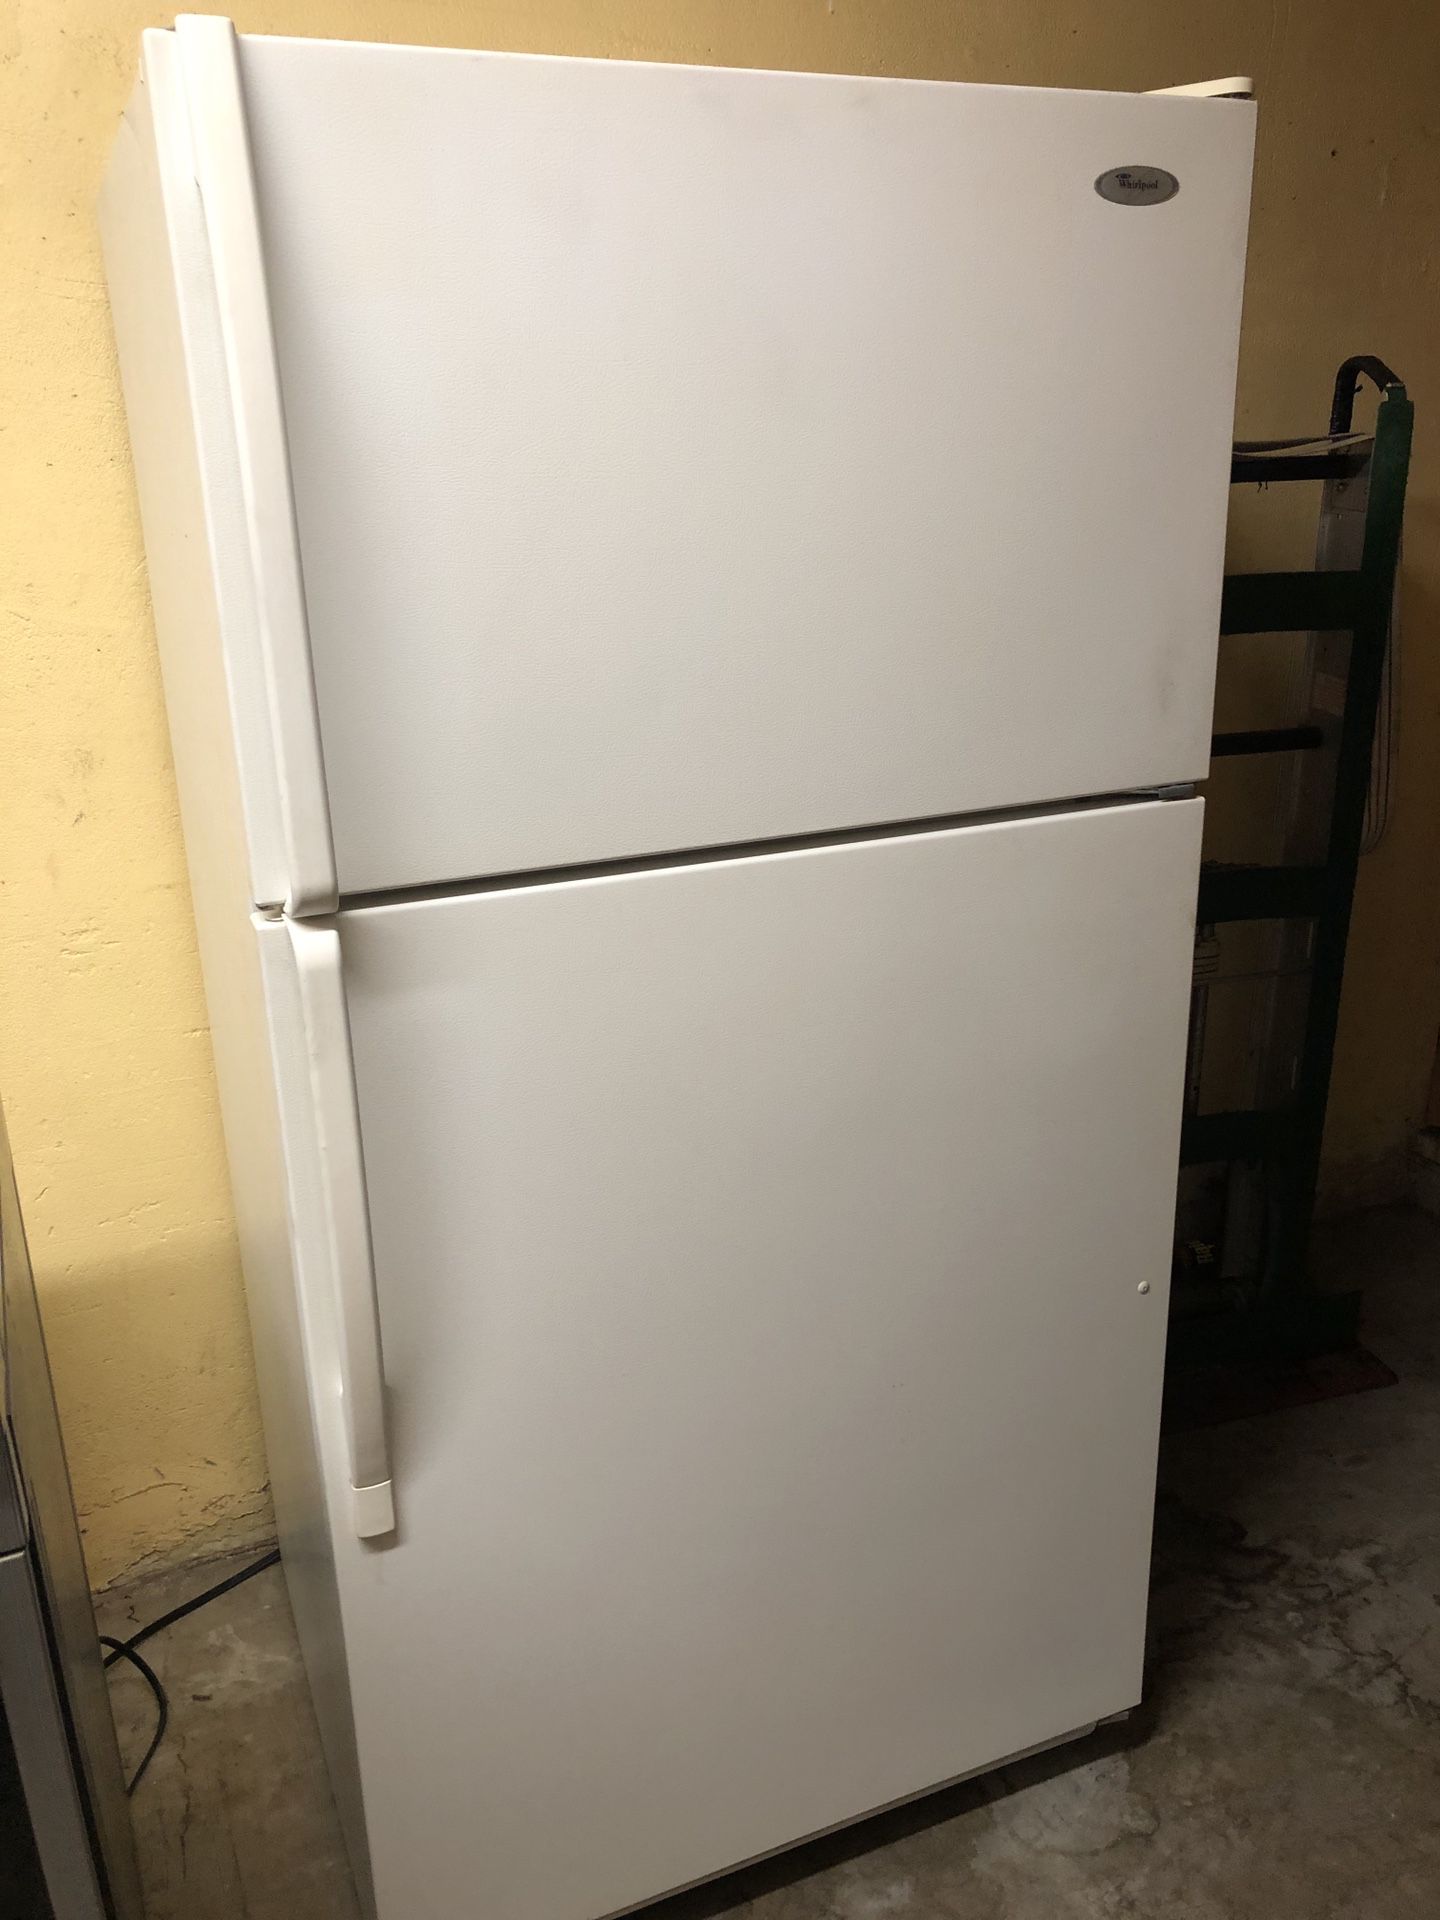 Whirlpool top freezer with ice maker